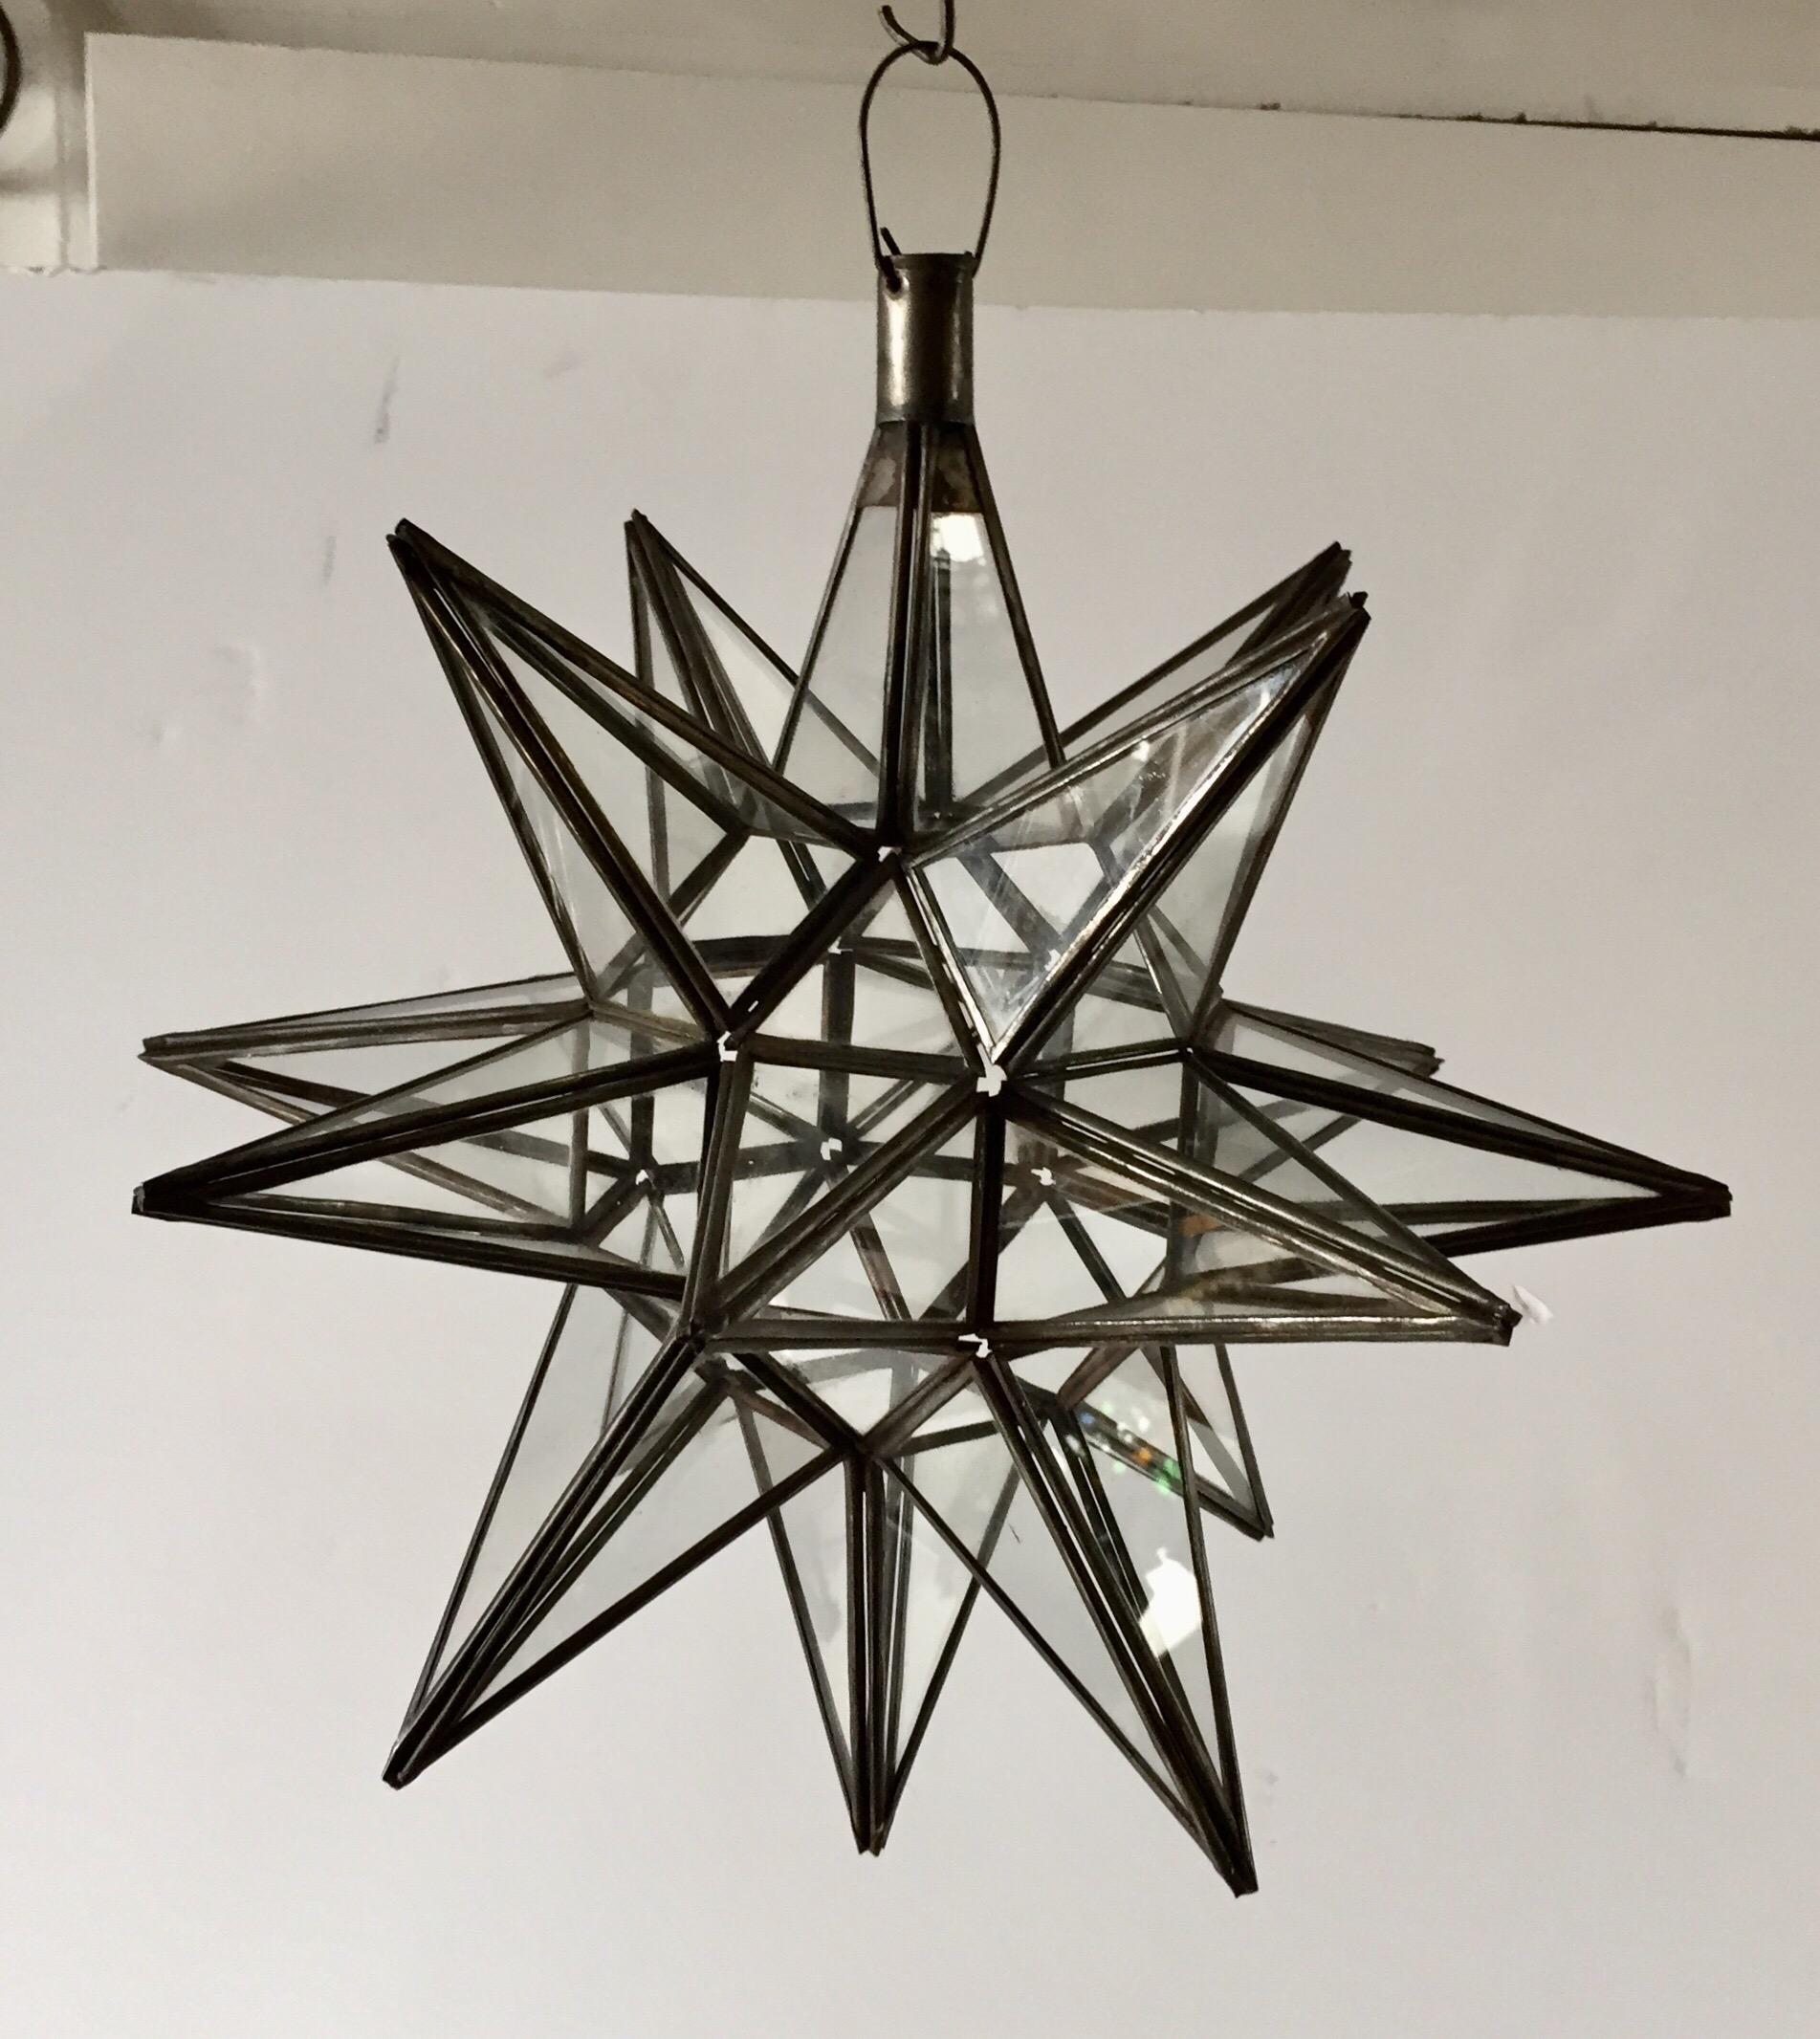 Moroccan clear glass and metal framed Moravian star shape lantern
A beautiful vintage geometric metal and glass star pendant.
Multifaceted large star lantern with glass panels that form geometrical shapes similar to Moravian stars.
The lantern